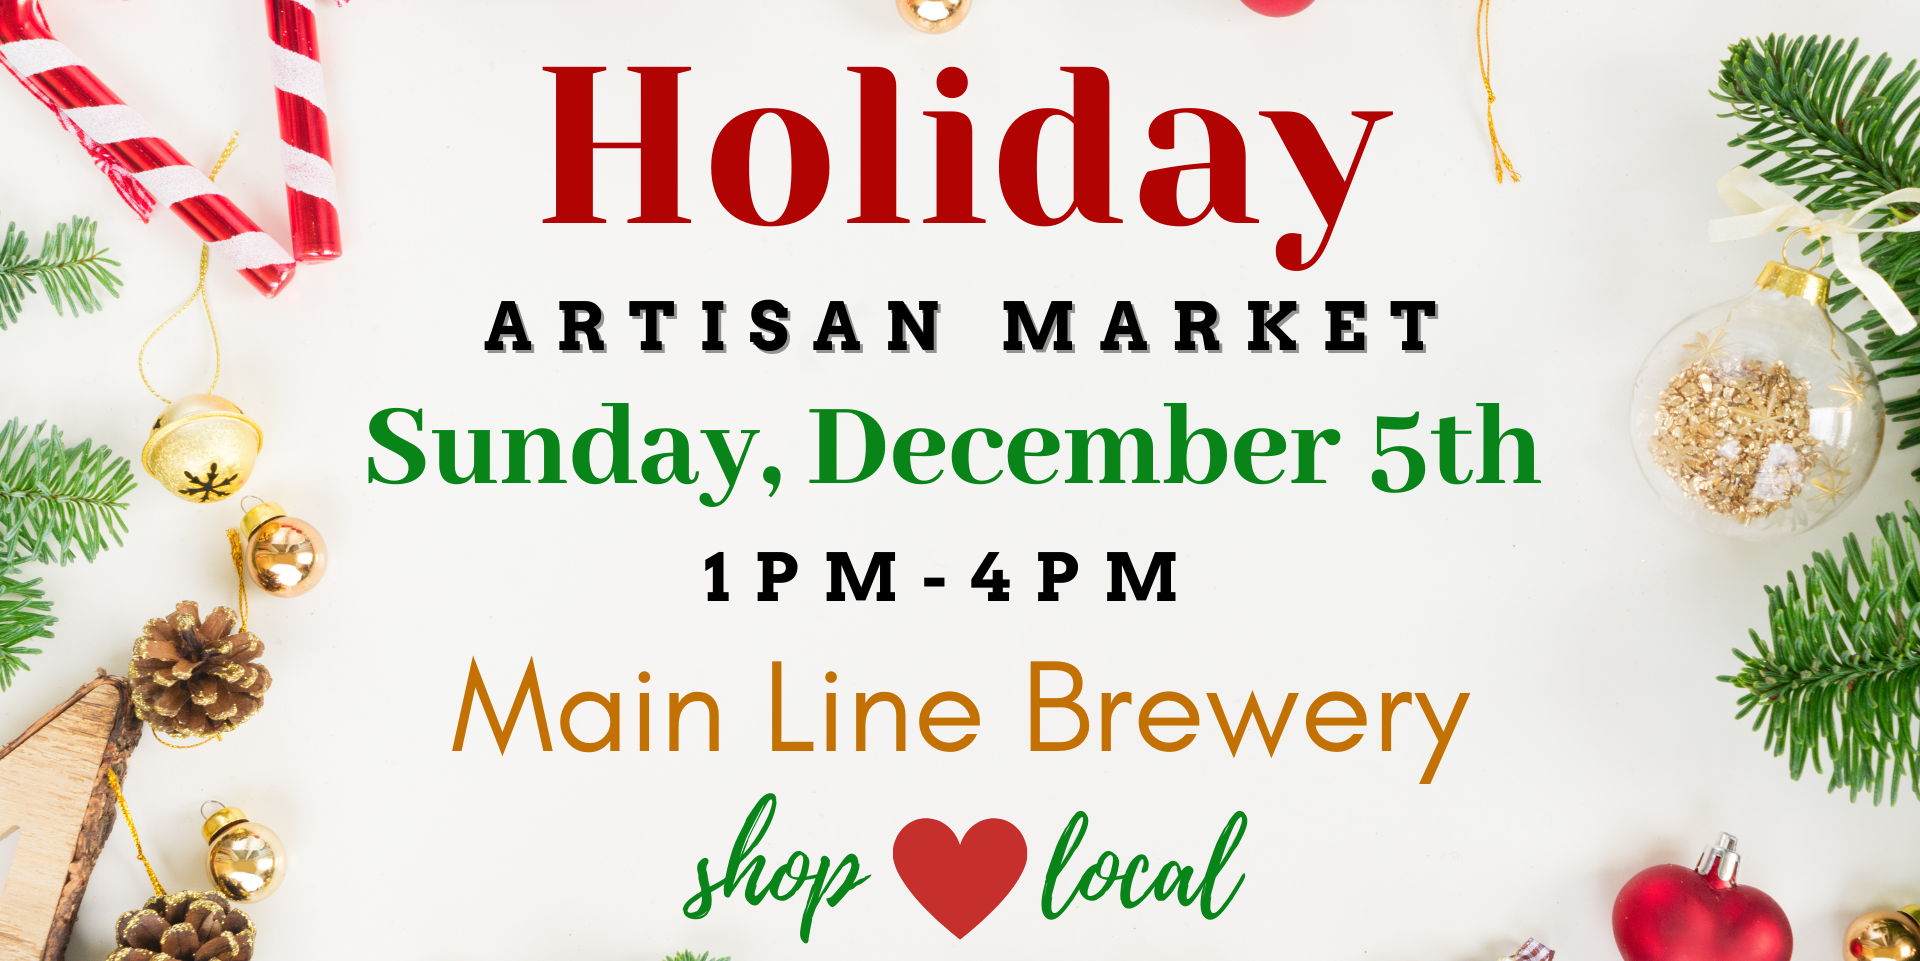 Holiday Artisan Market at Main Line Brewery  promotional image